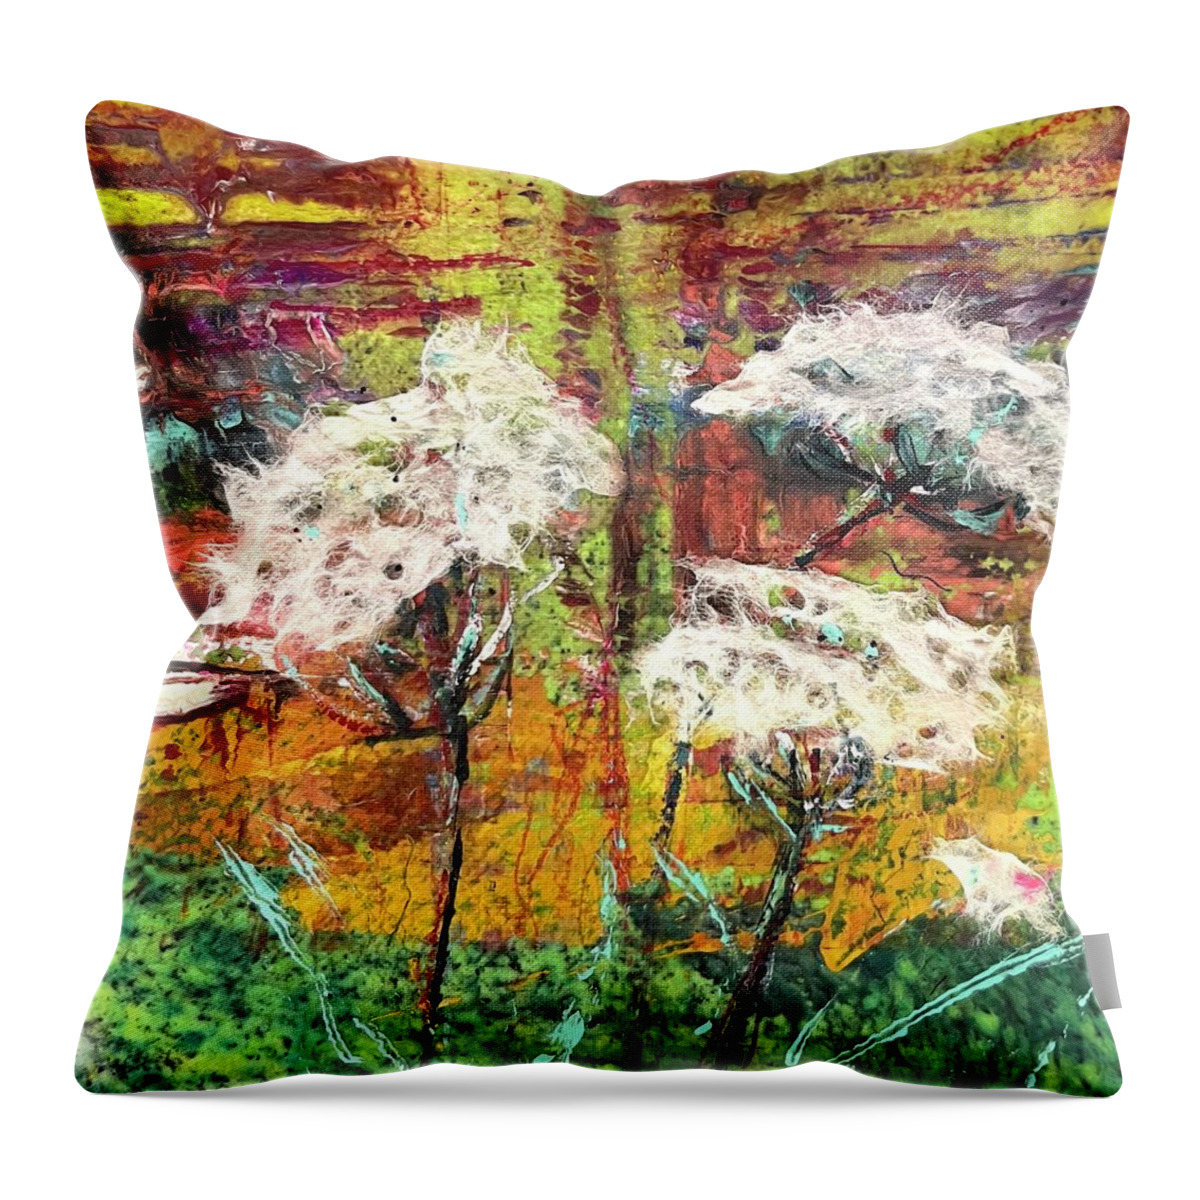 Queen Anne Lace Throw Pillow featuring the painting Wild Thing - Queen Anne Lace by Cheryl Prather